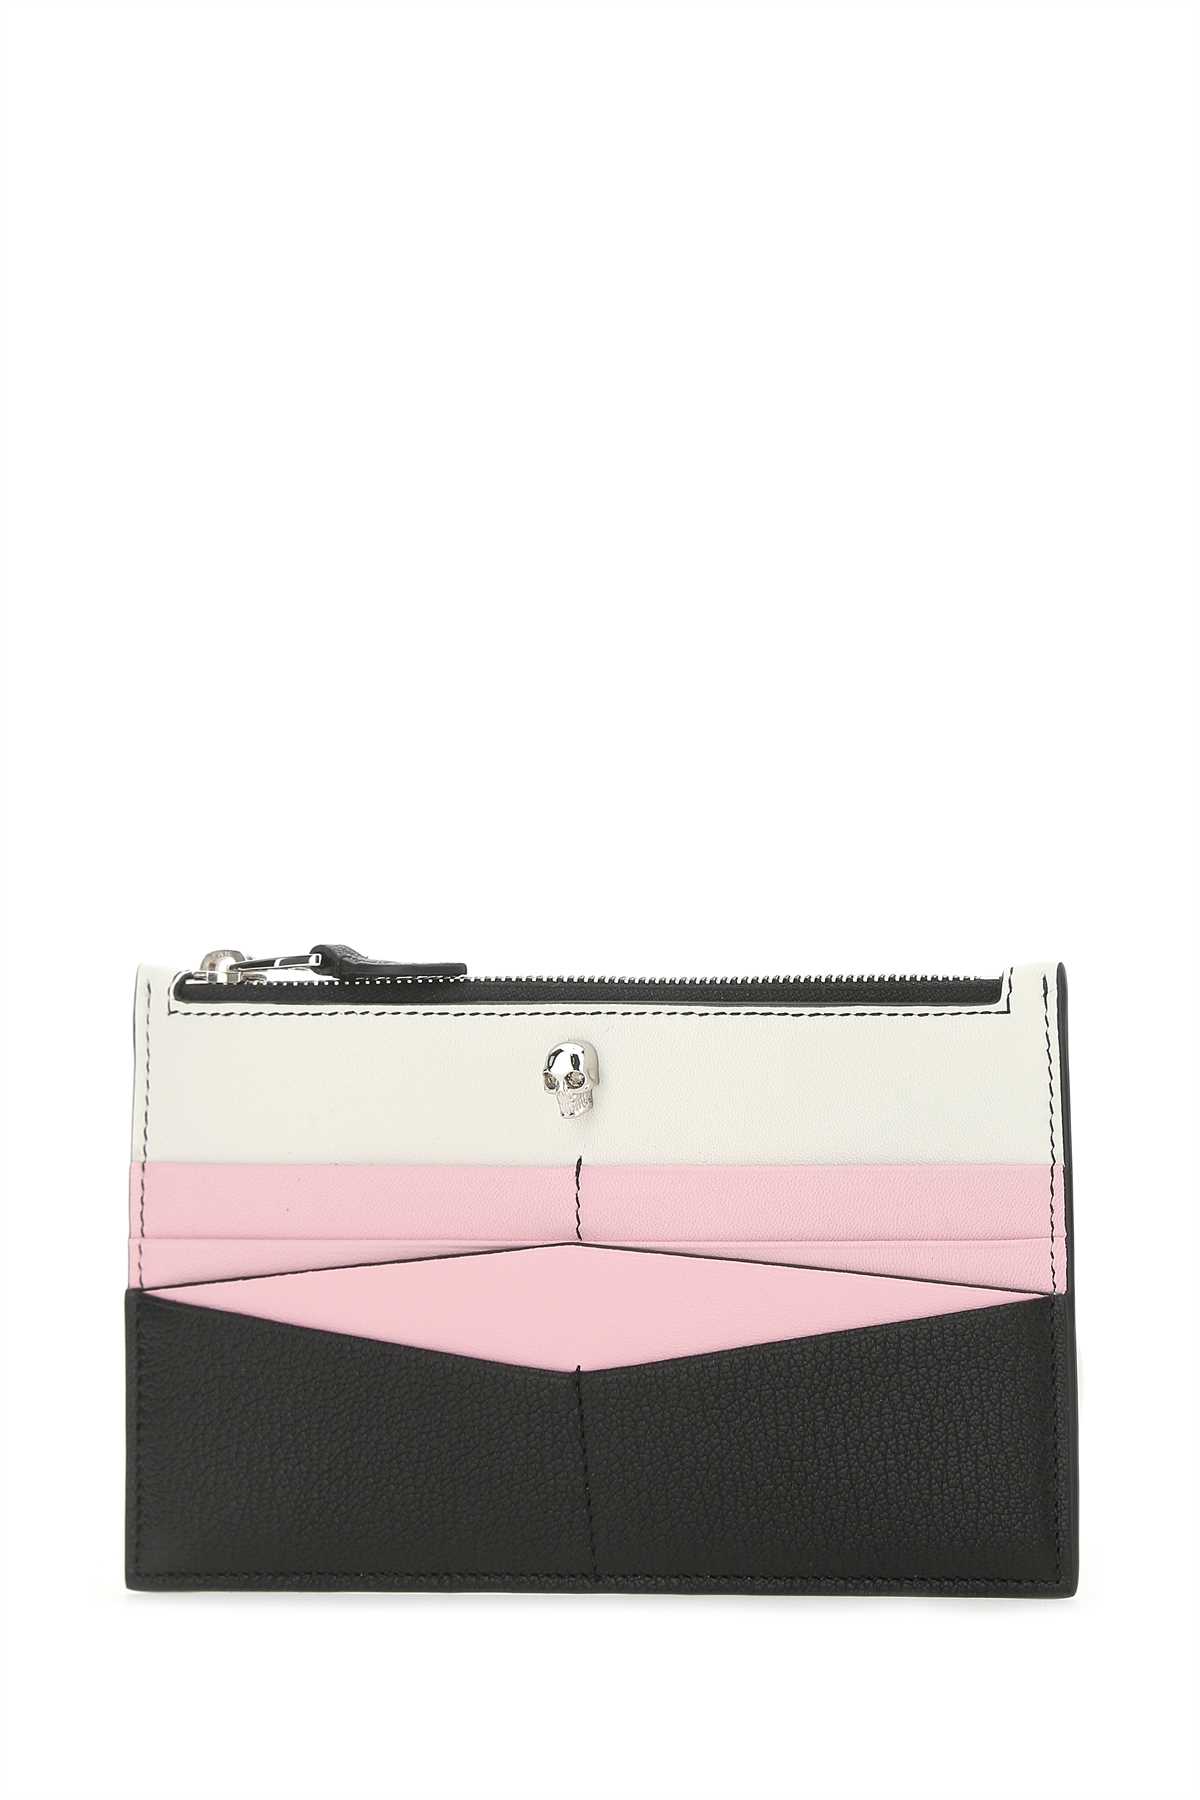 Alexander Mcqueen Multicolor Leather Pouch In 8490